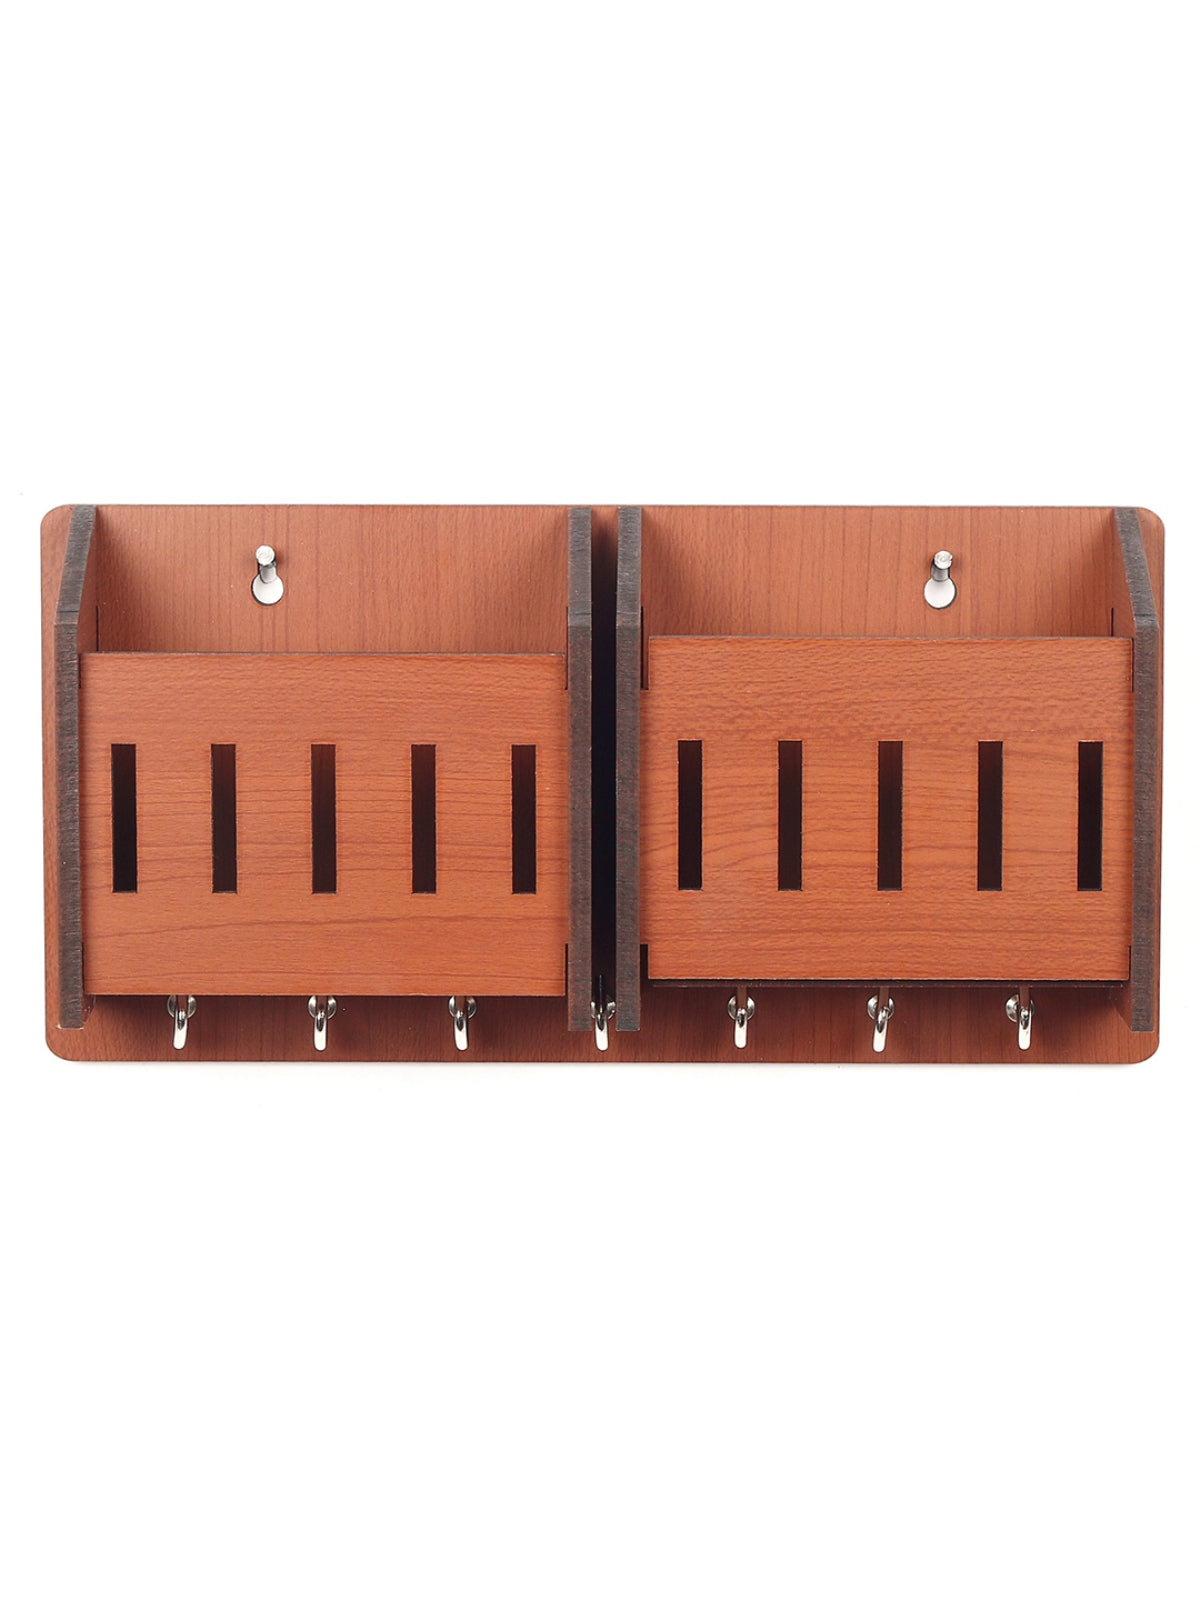 Wooden Key Holder With 2 Mobile & Magazine Organizer, Home & Office Wall Decorative